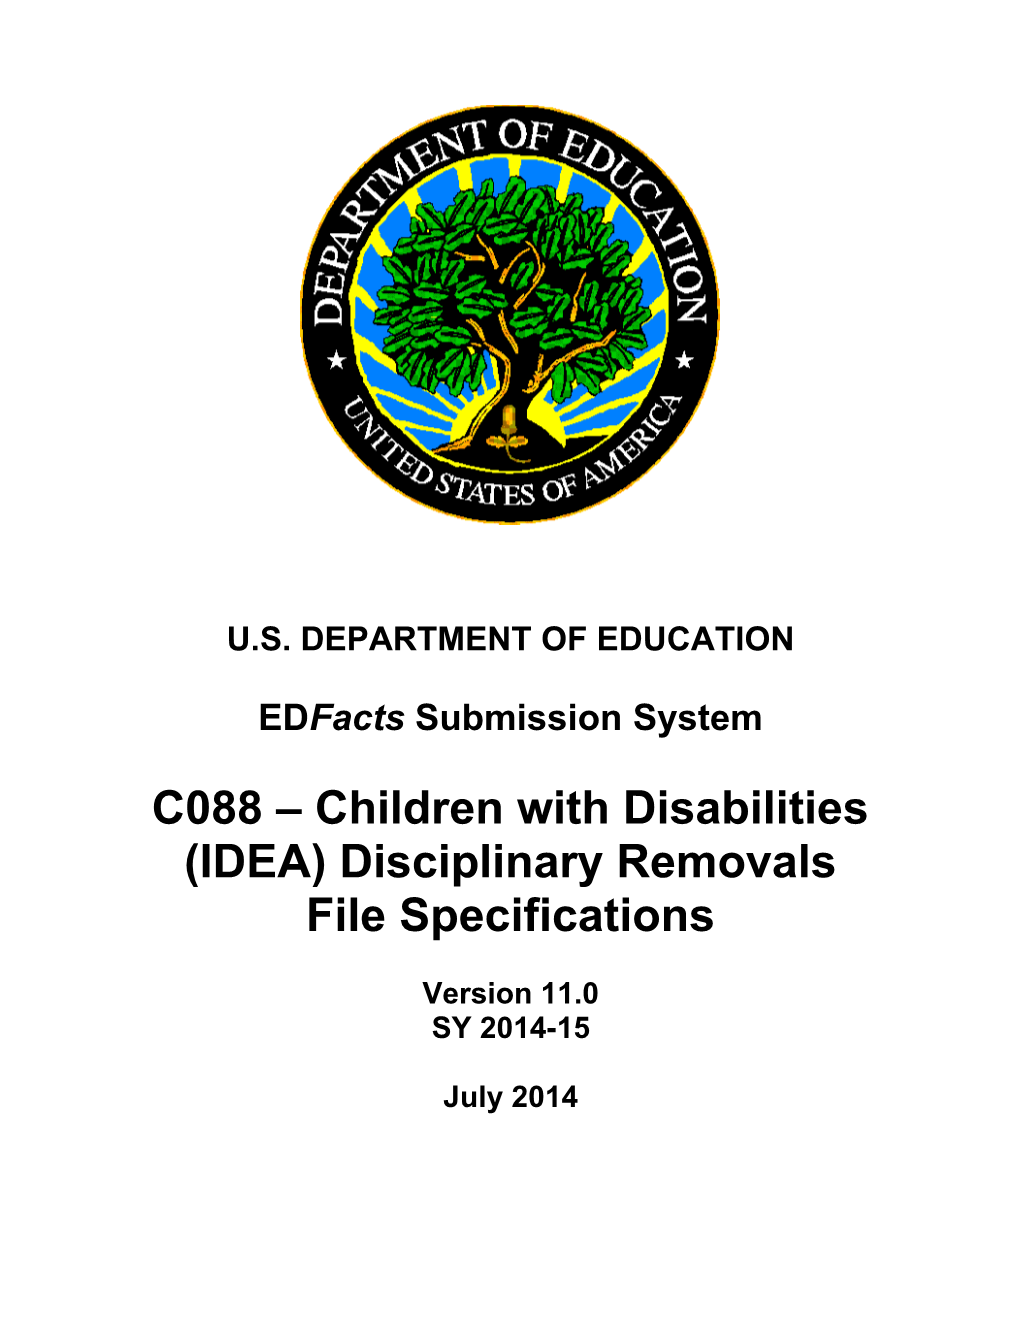 Children with Disabilities (IDEA) Disciplinary Removals File Specifications